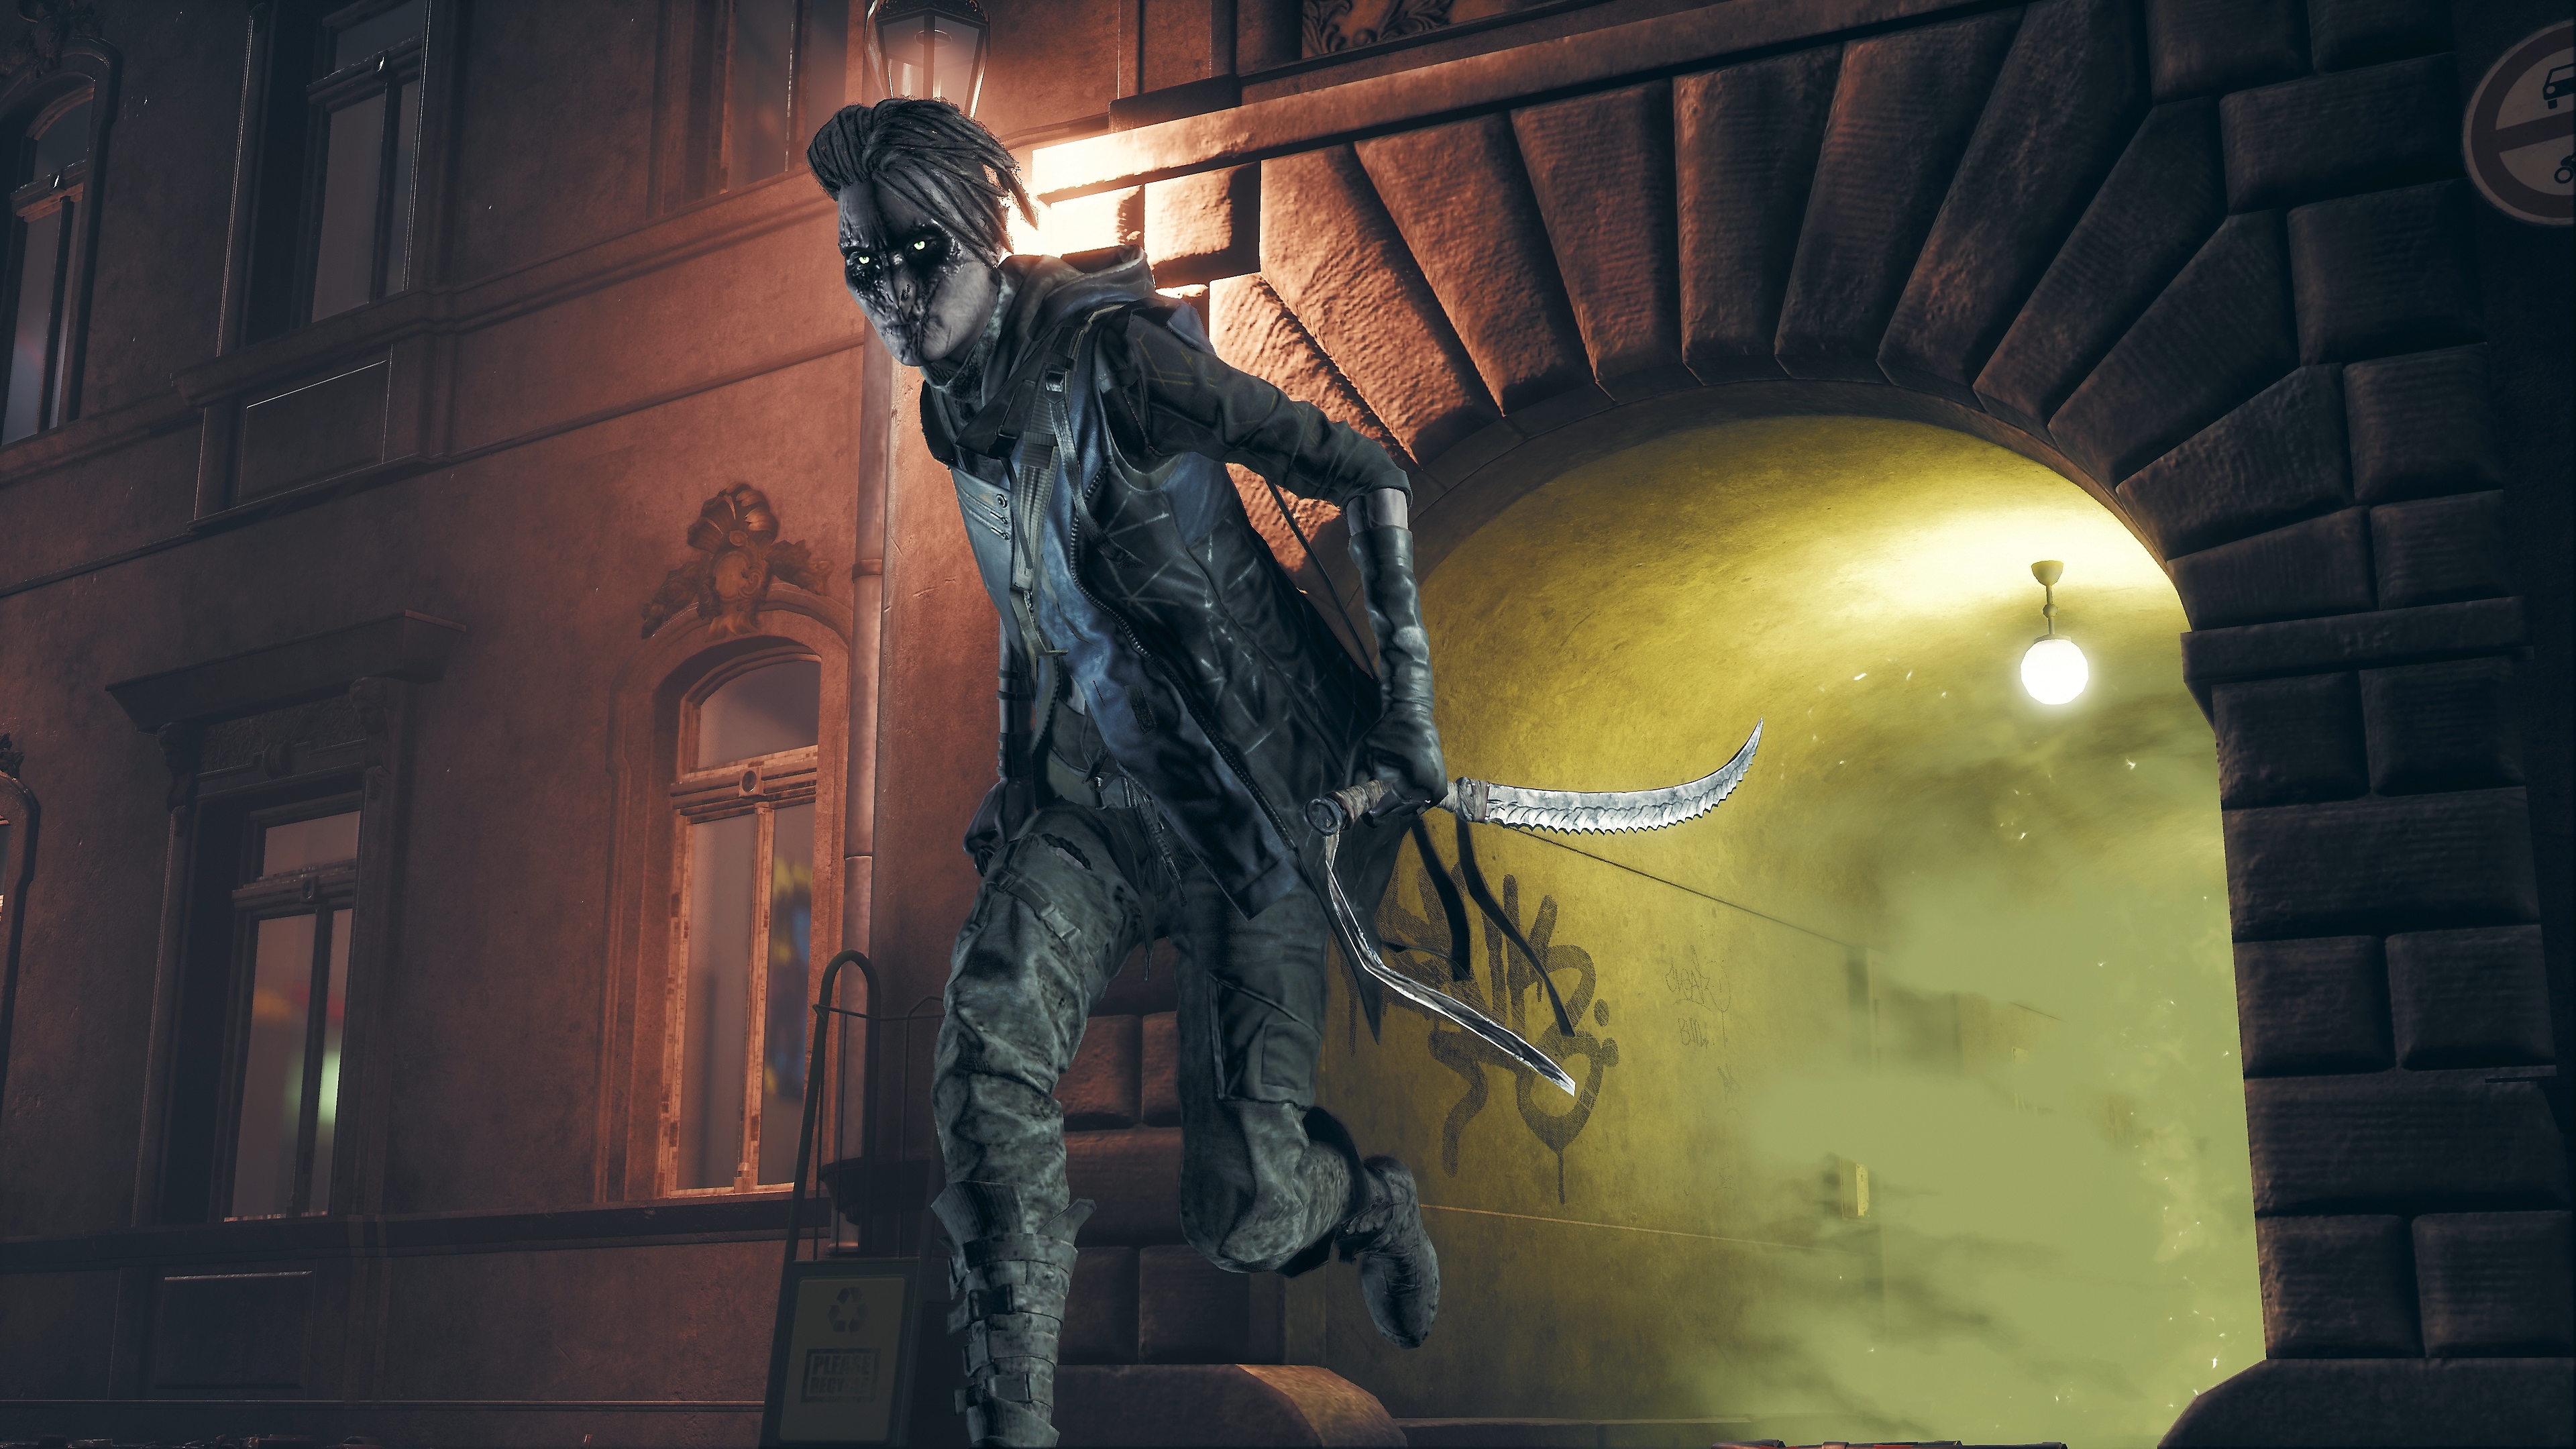 Vampire the Masquerade - Bloodhunt screenshot showing a character running out of an alleyway